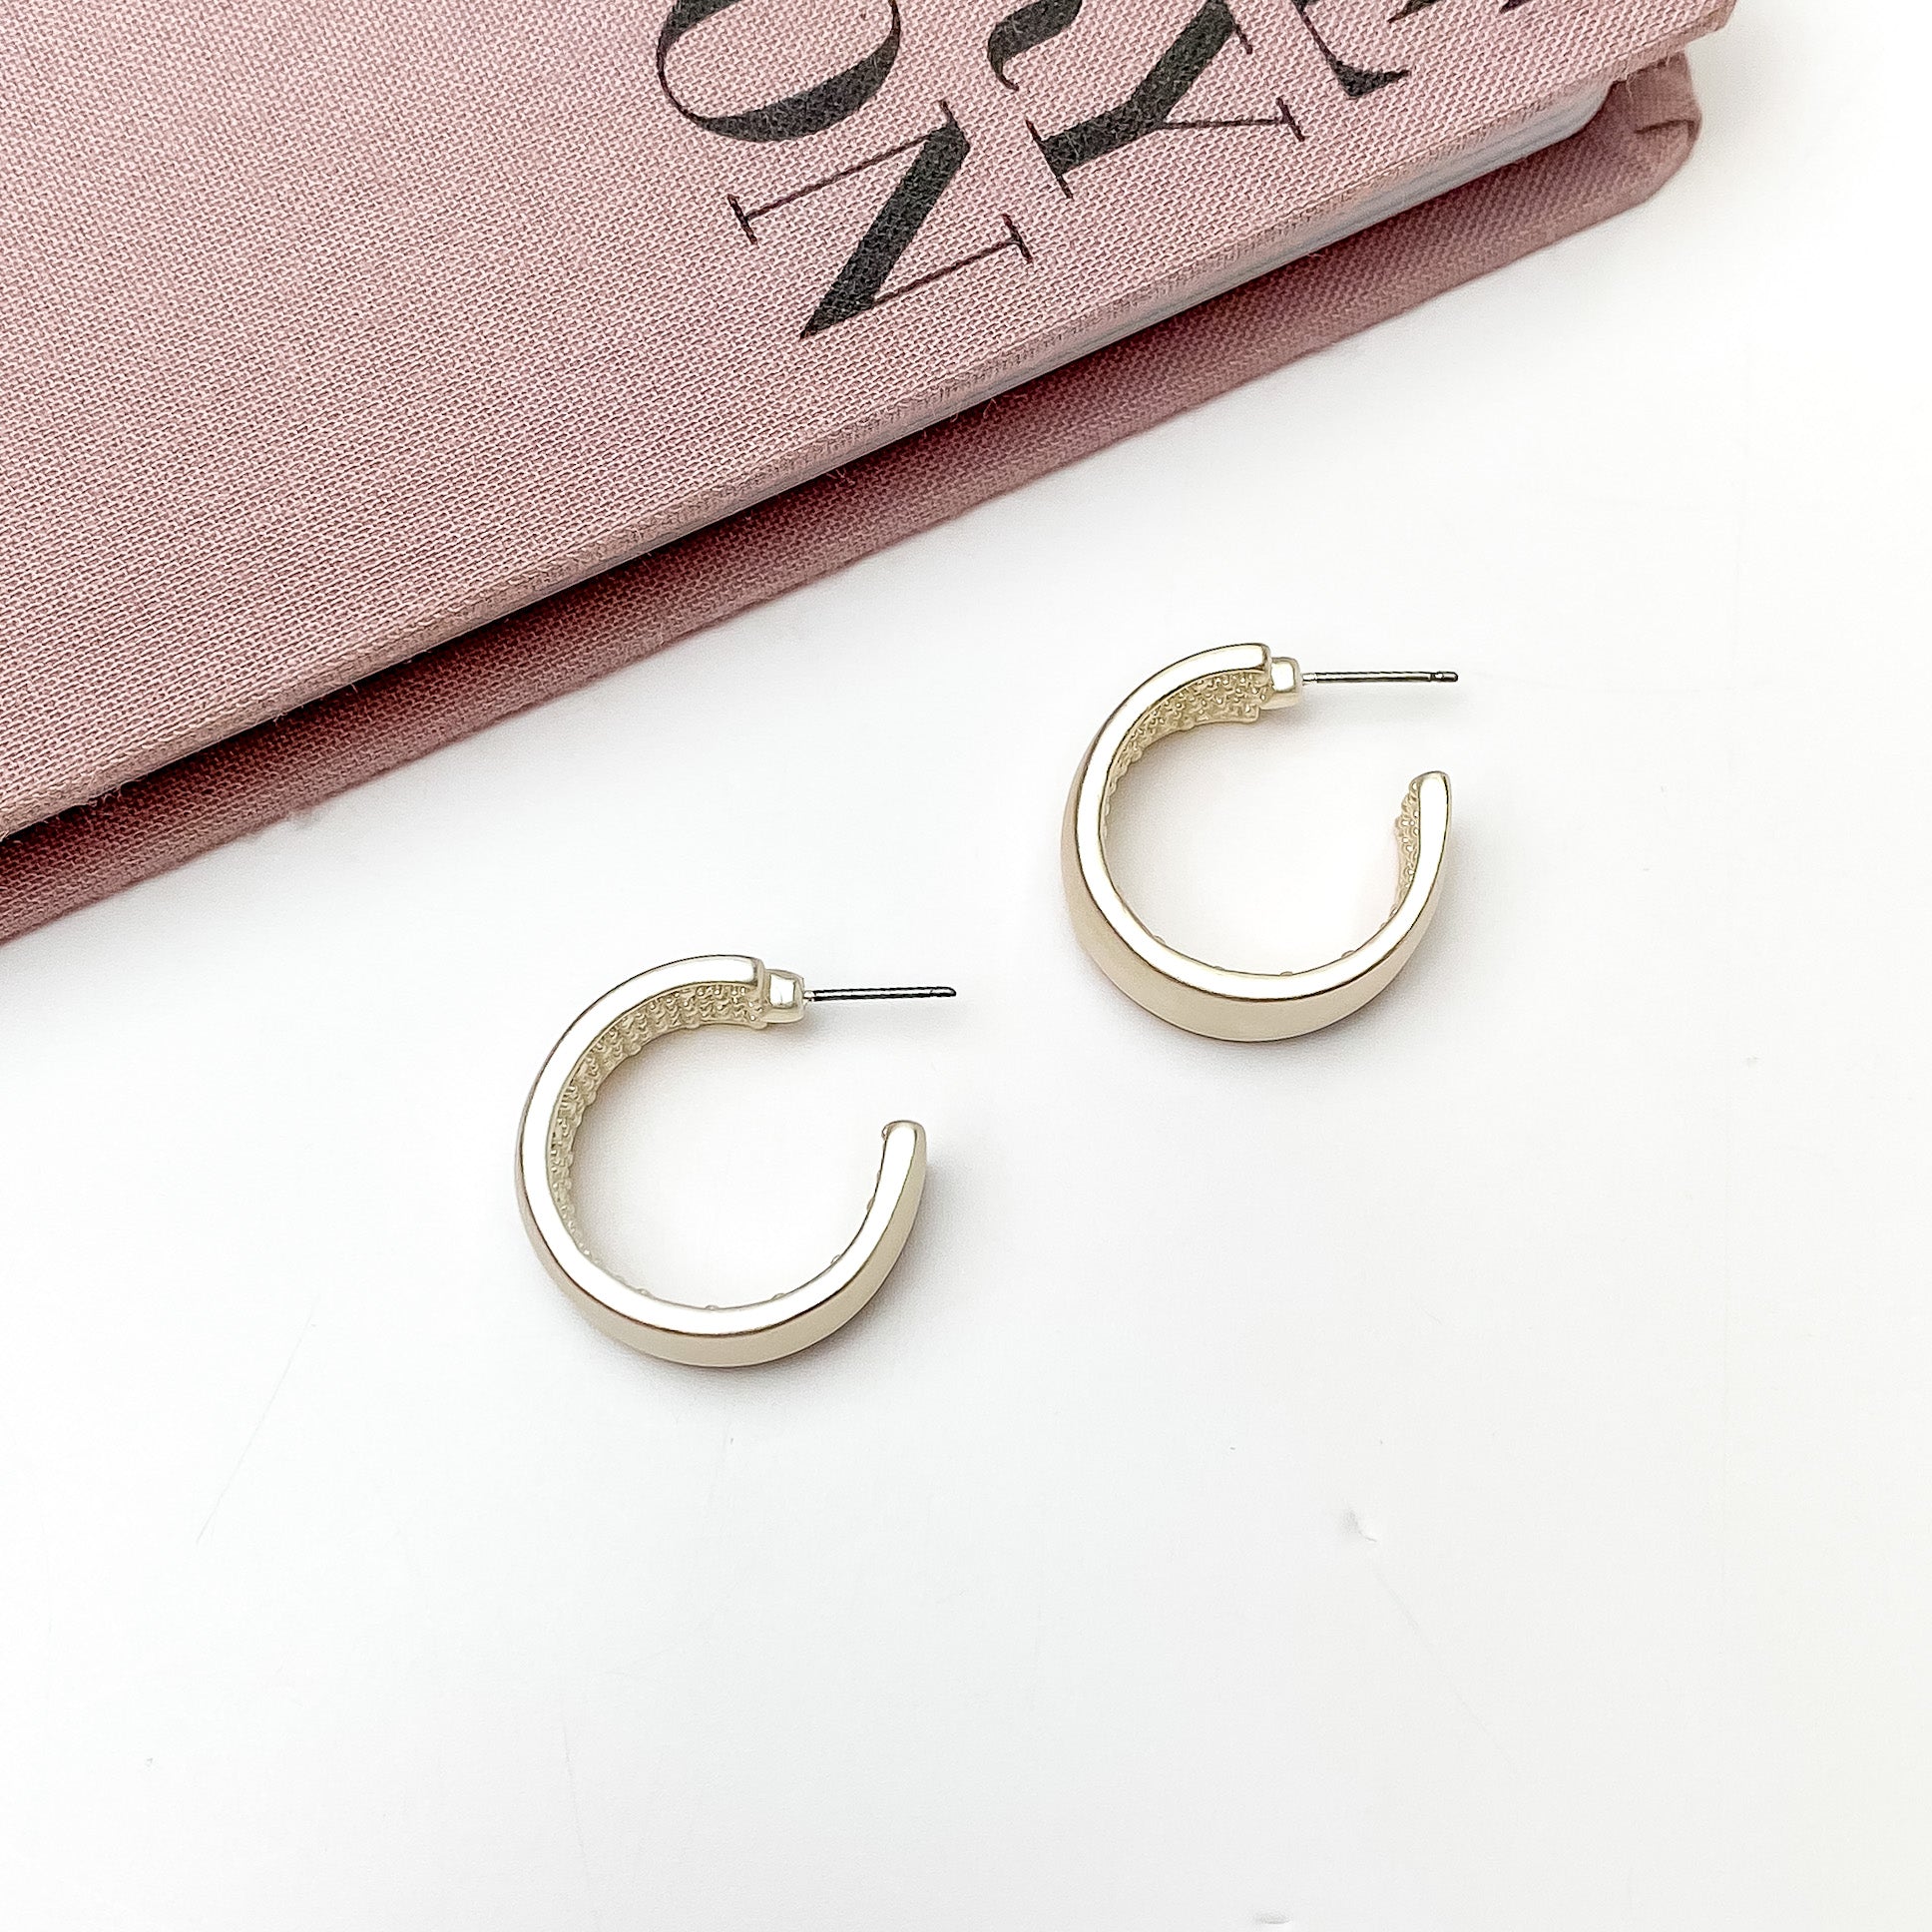 Silver Tone Small Hoop Earrings With a Textured Inside - Giddy Up Glamour Boutique